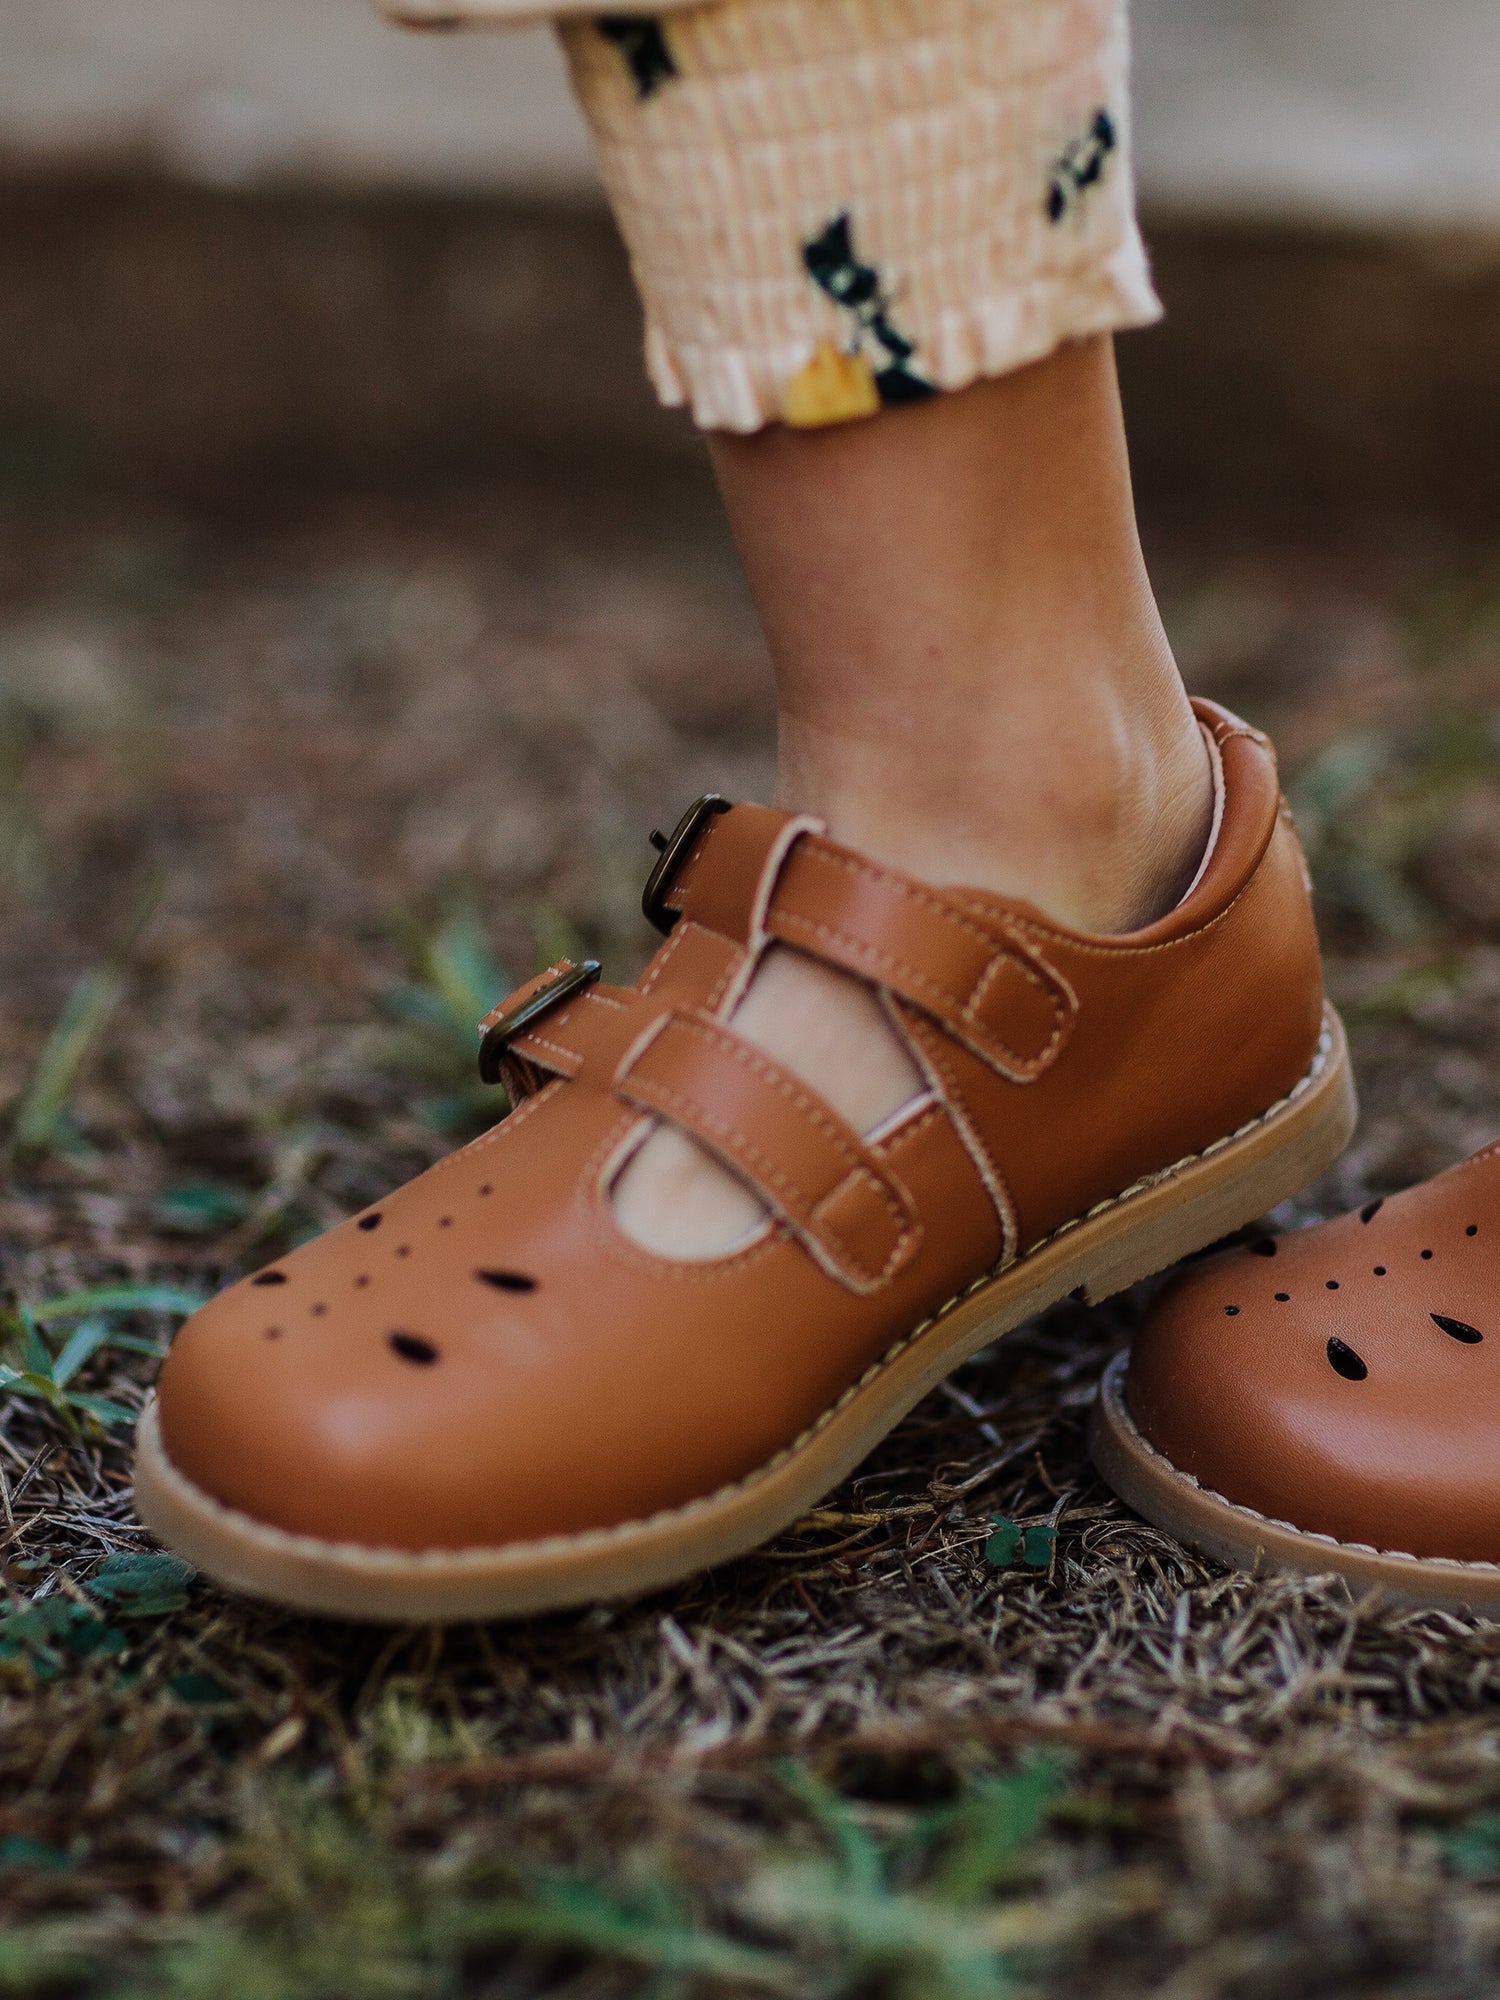 A pair of camel colored genuine leather rubber soled shoes with two adjustable metal buckles and ventilation holes across the toe area in a dragonfly type pattern.